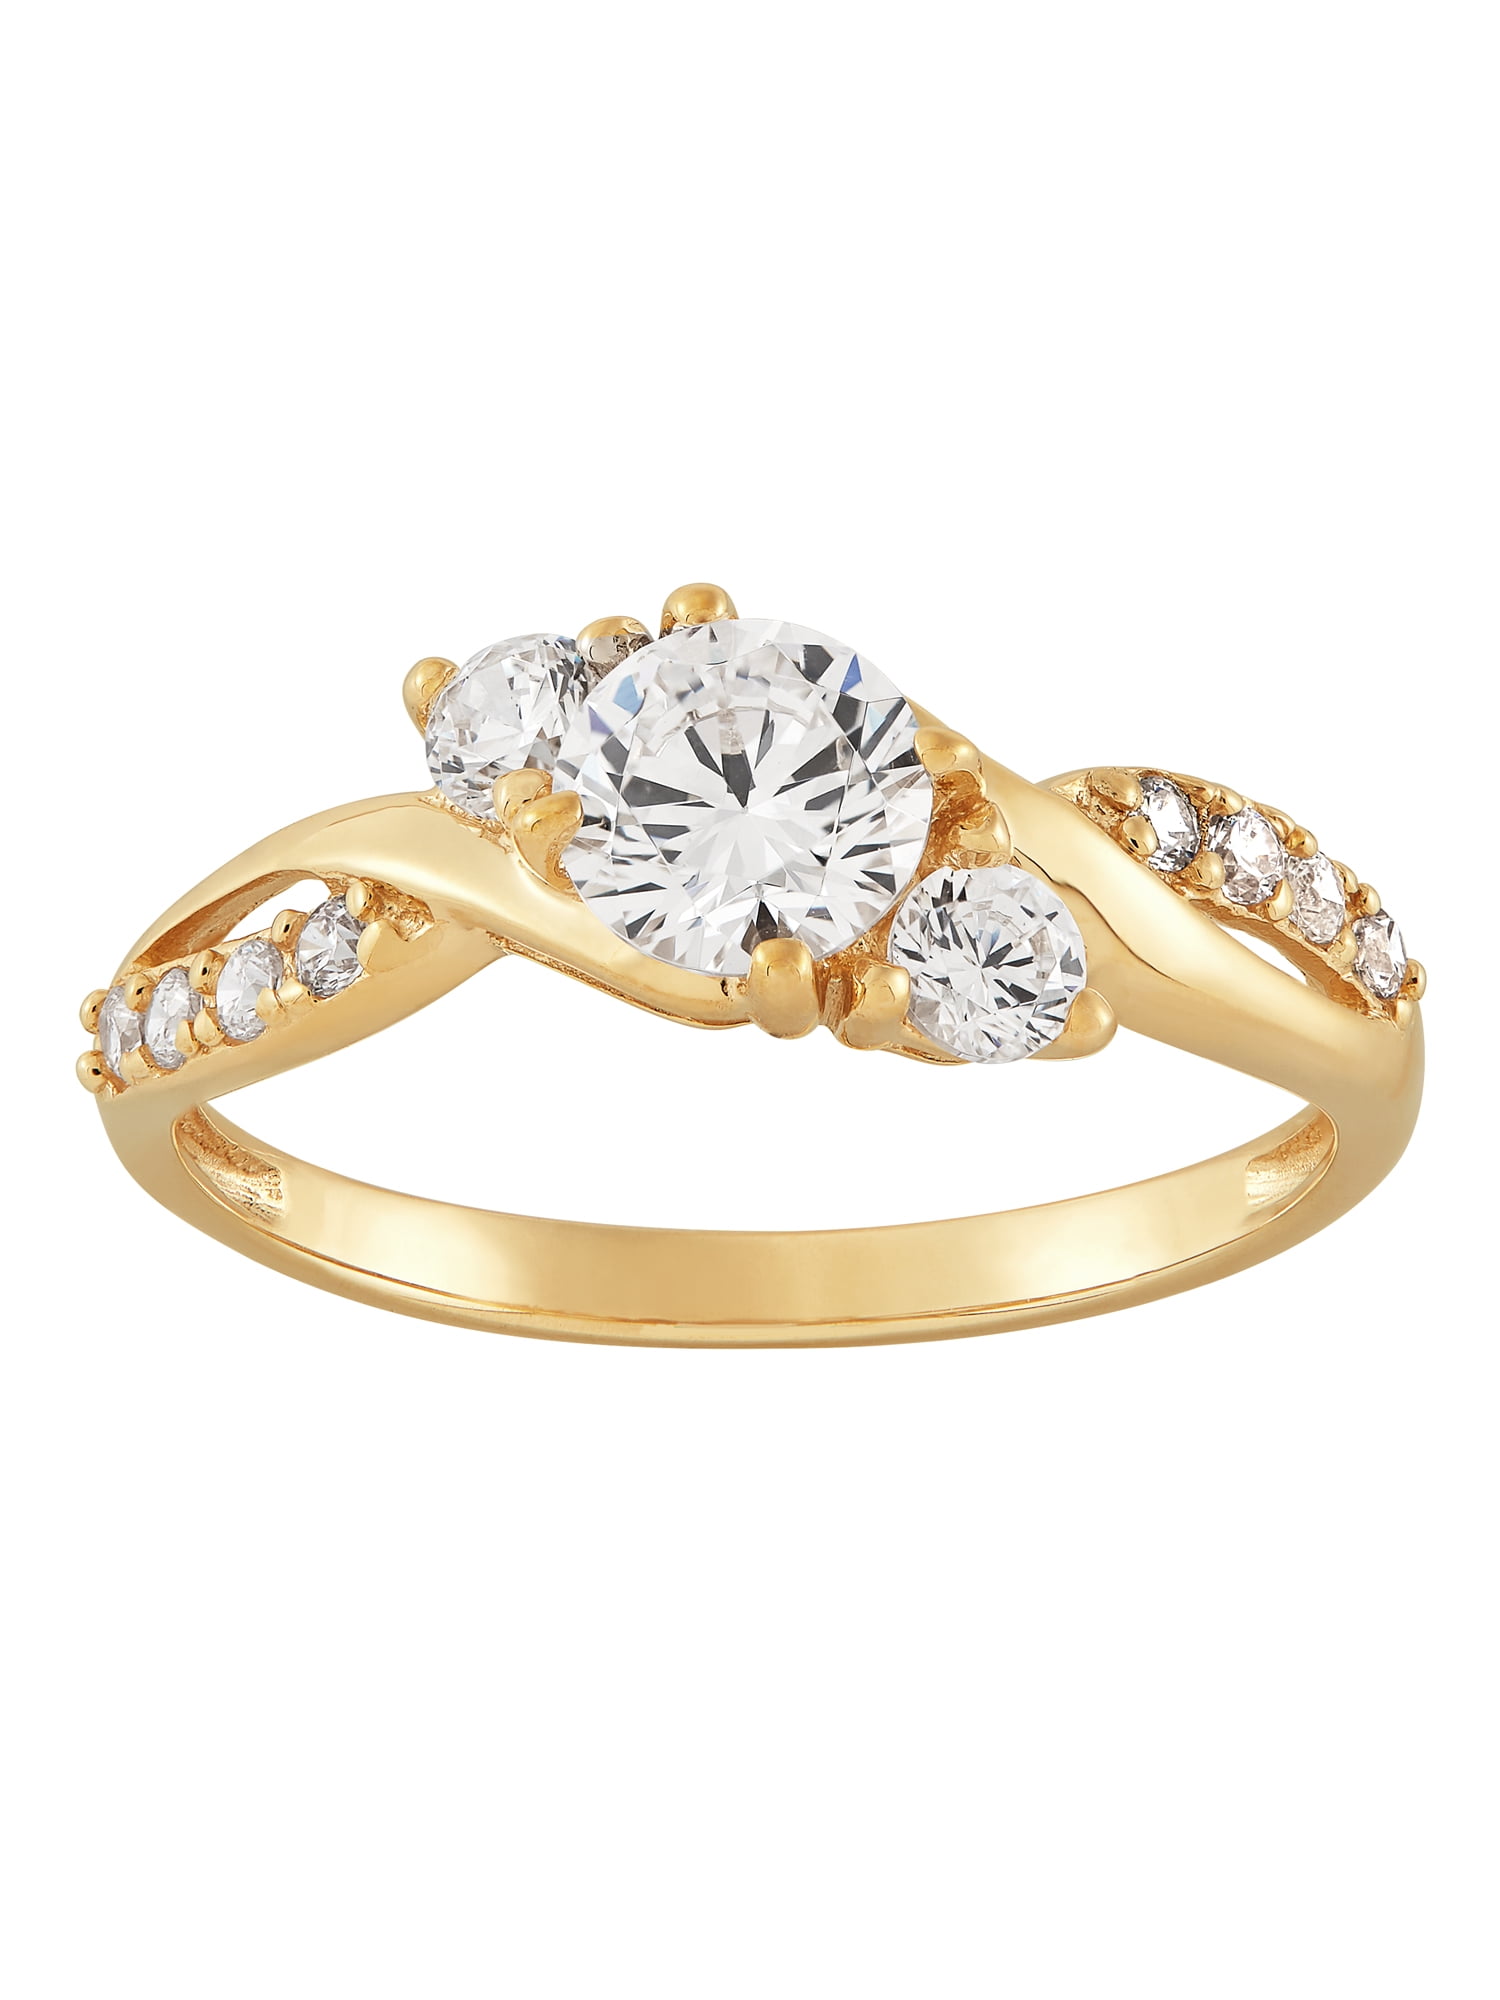 Details about   3 ctw Brilliant Cubic Zircon Pear Yellow GP Engagement Ring AAA CZ Size 6 8 7 